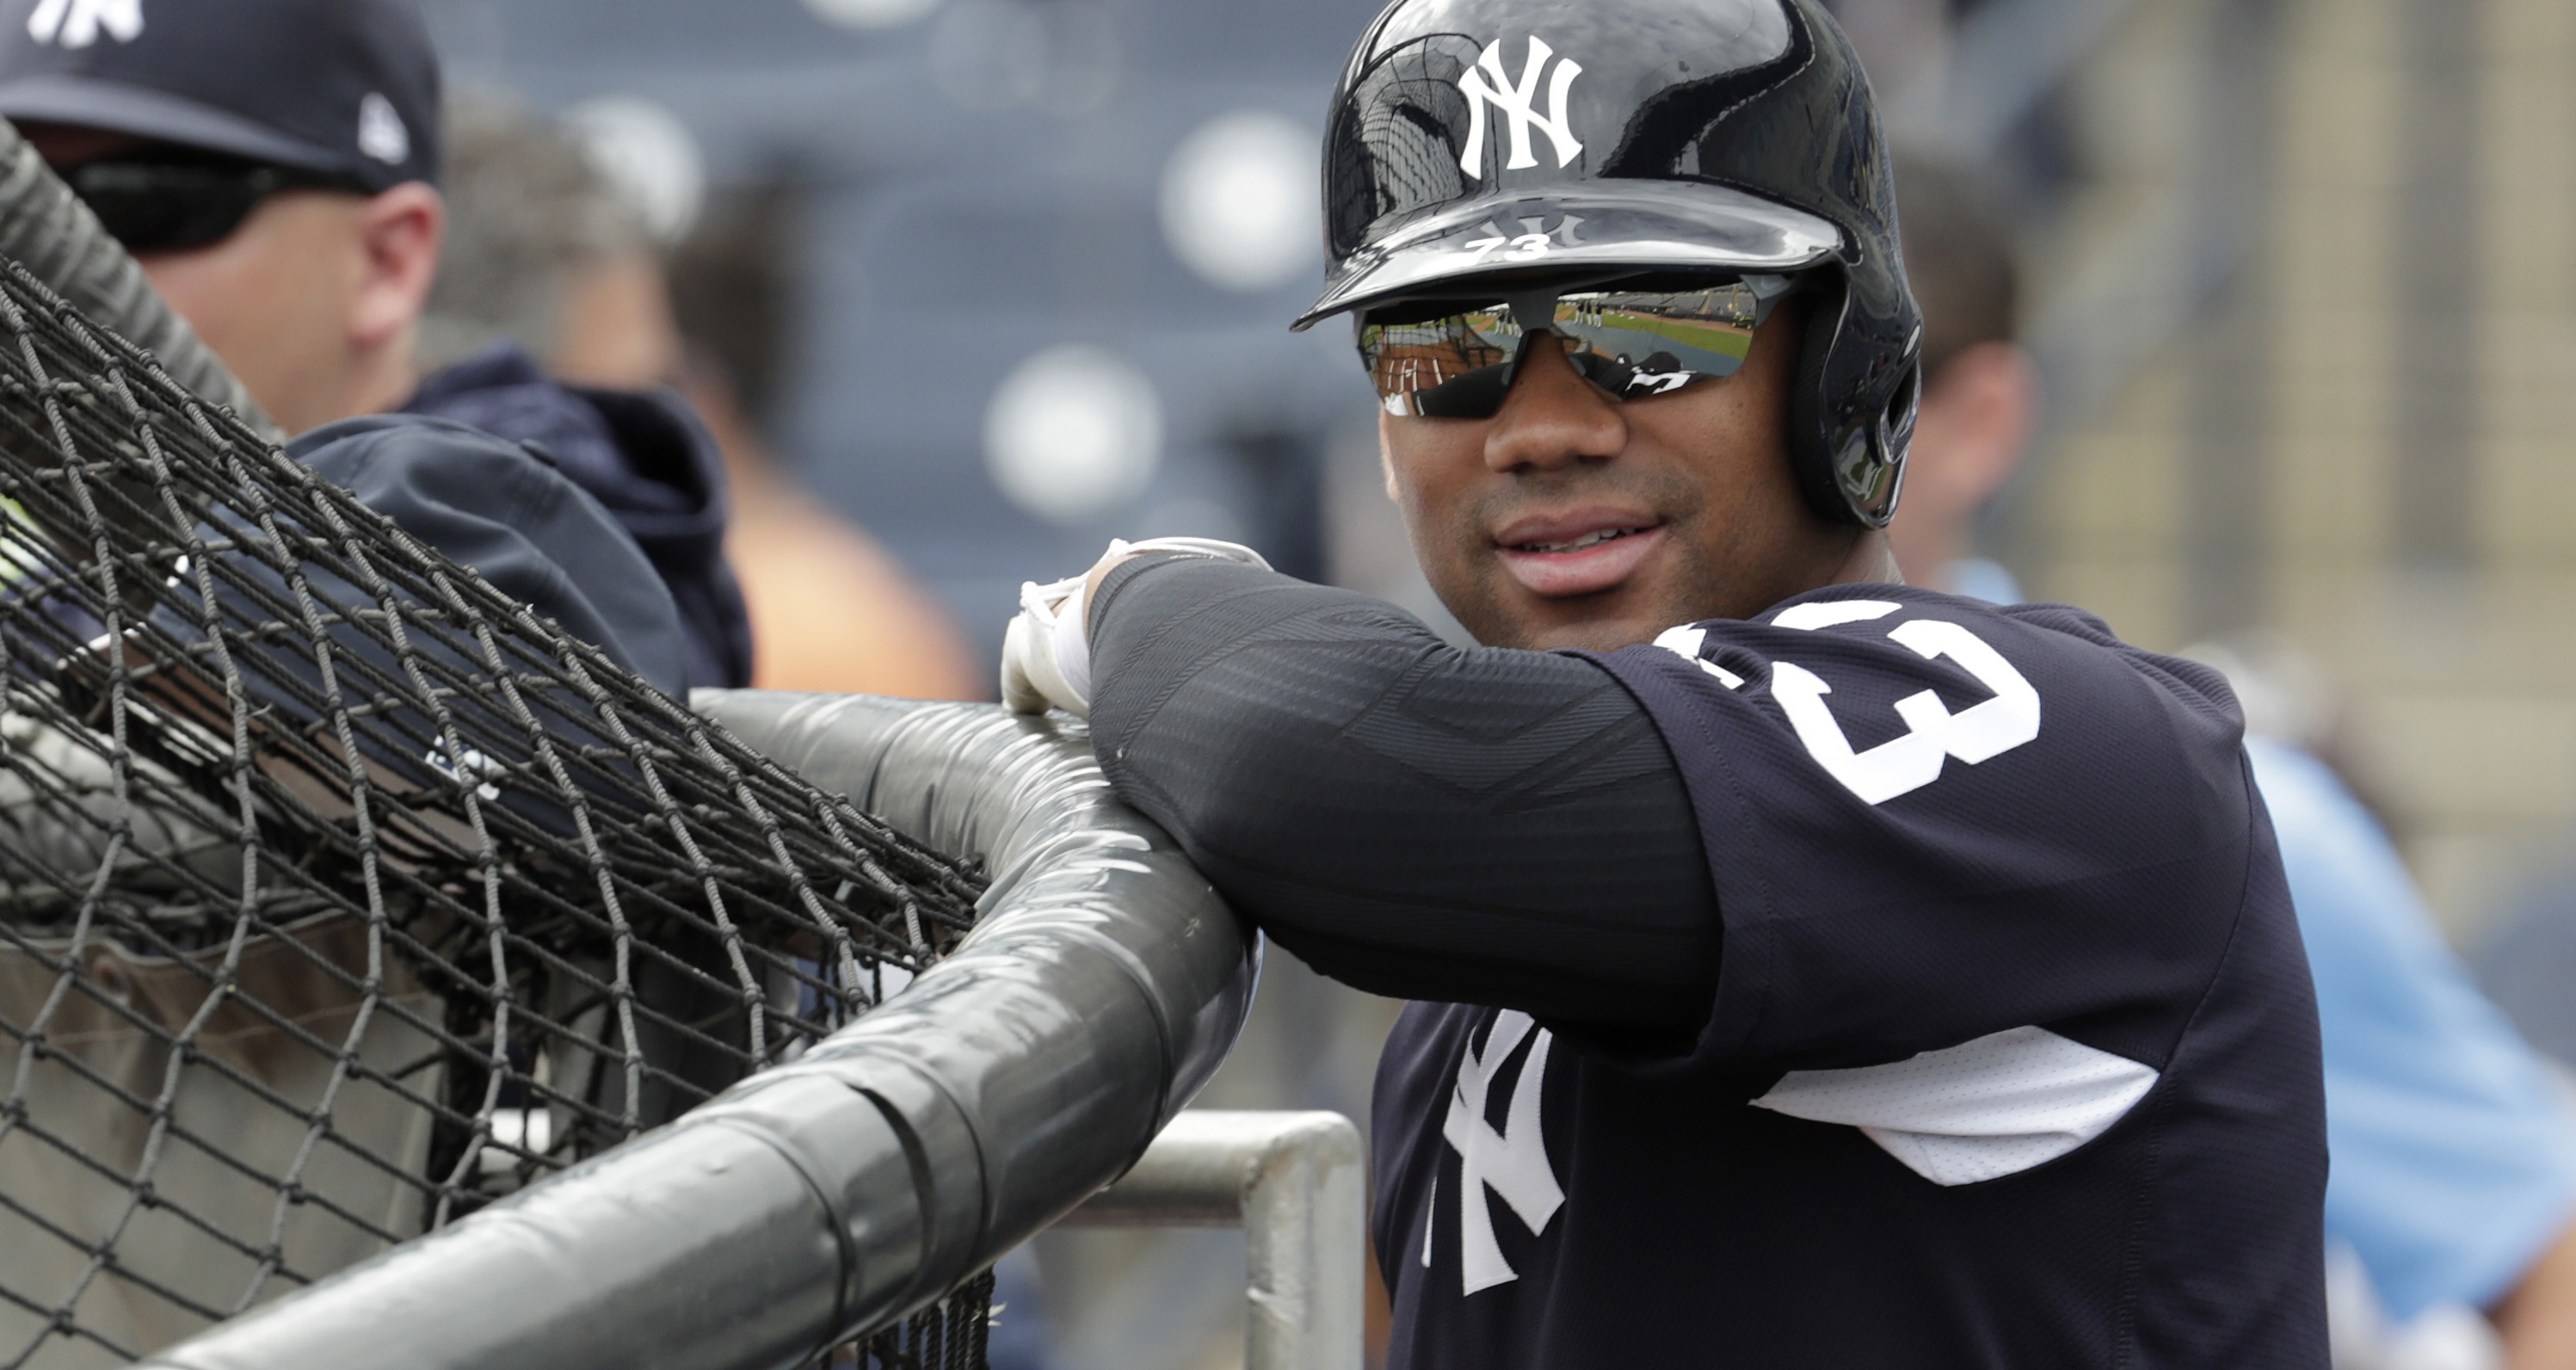 Russell Wilson strikes out in New York Yankees spring training debut 